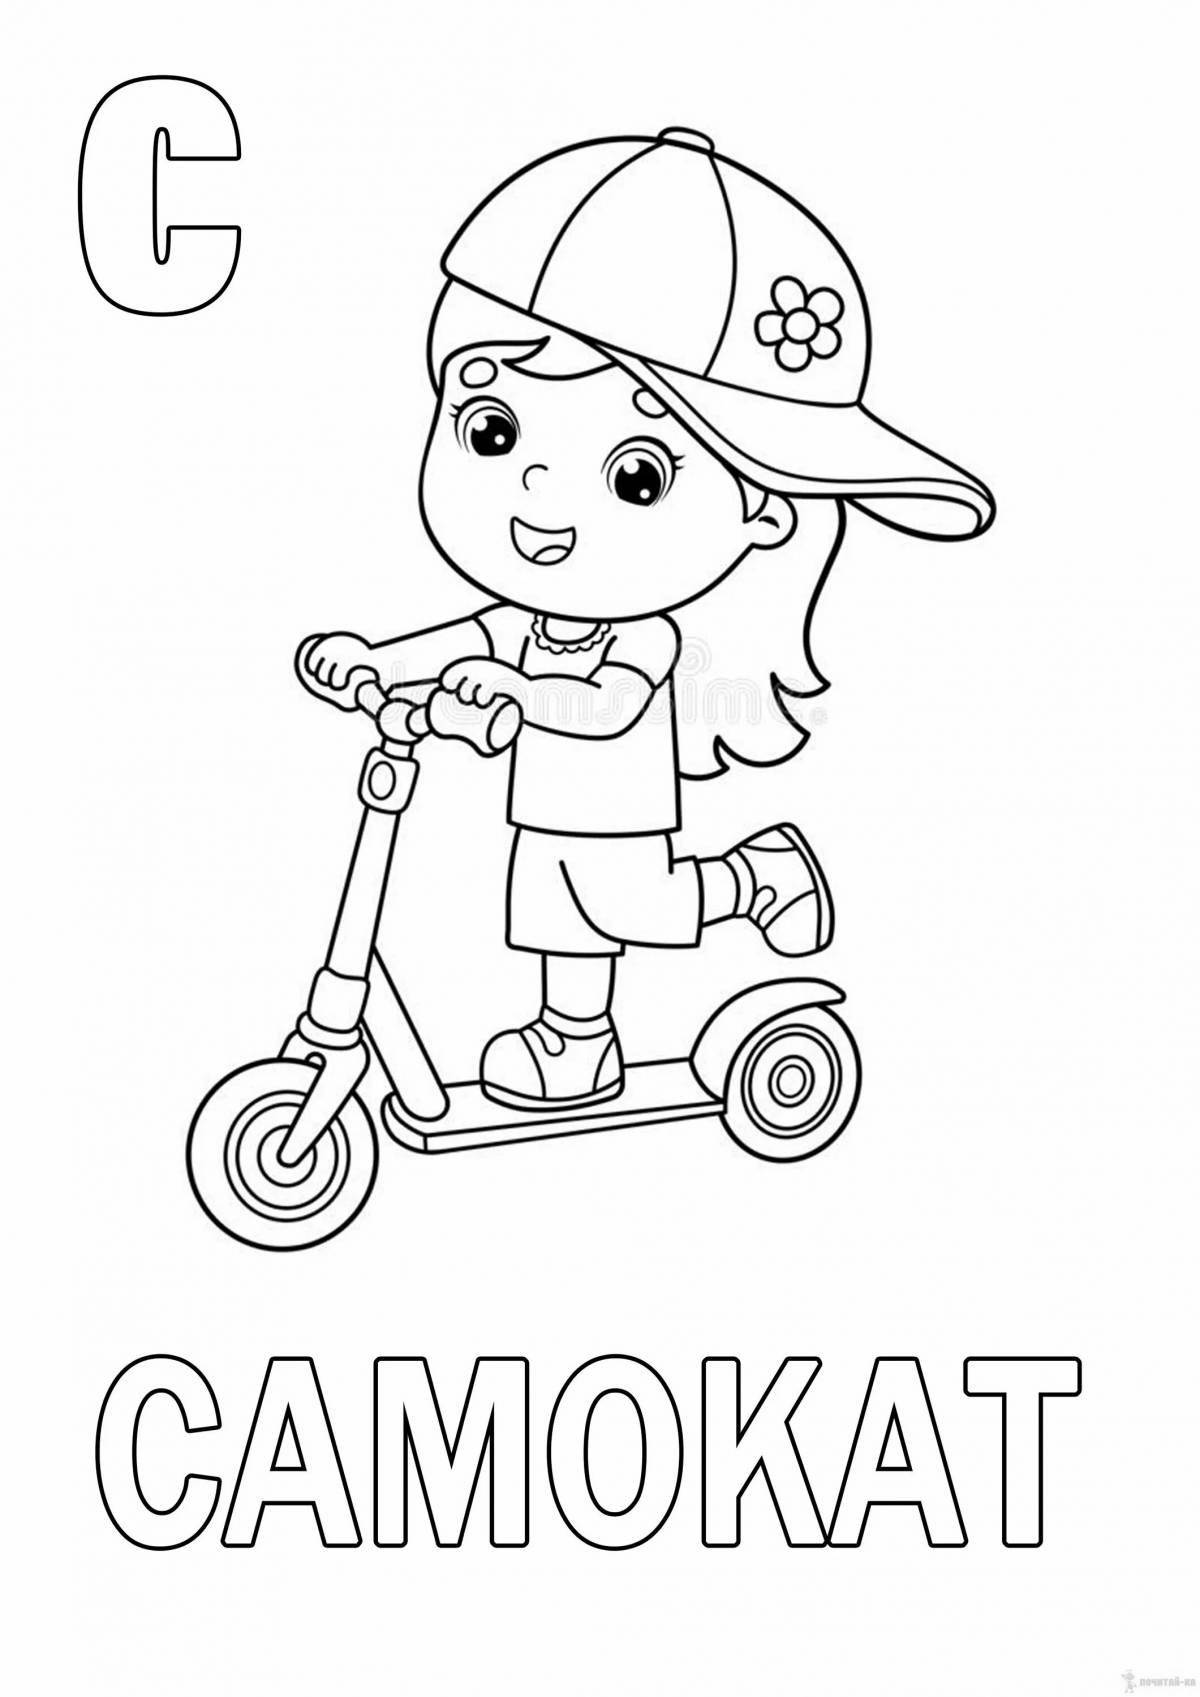 A wonderful scooter coloring book for kids